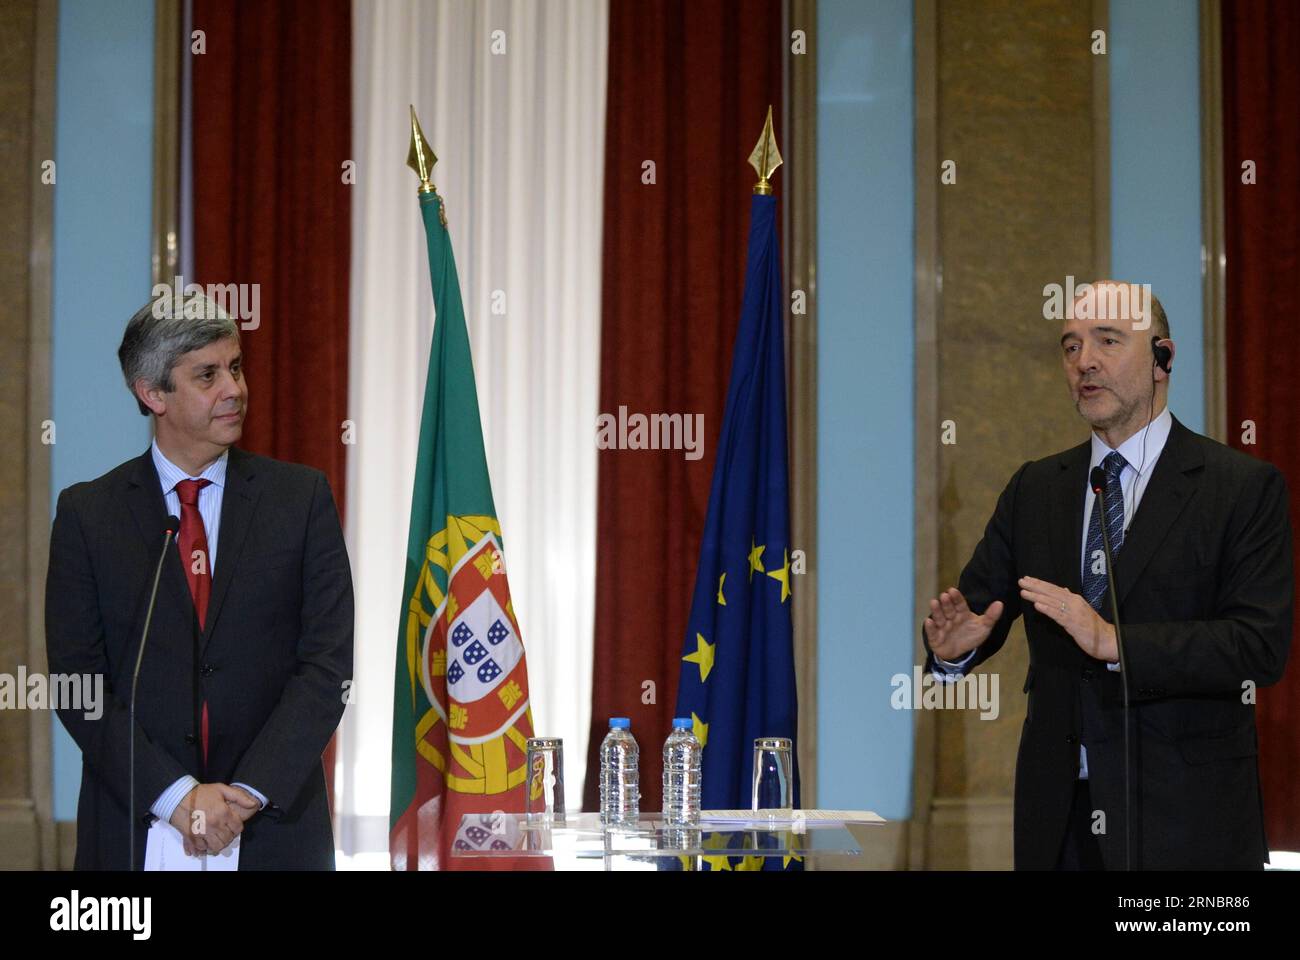 (160310) -- LISBON, March 10, 2016 -- Portugal s Finance Minister Mario Centeno (L) and European Commissioner for Economic and Financial Affairs Pierre Moscovici attend a press conference in Lisbon, Portugal, March 10, 2016. European Commissioner for Economic and Financial Affairs Pierre Moscovici said here on Thursday that he will be working closely with the Portuguese government to put the country back on track. ) PORTUGAL-LISBON-EU-FINANCE ZhangxLiyun PUBLICATIONxNOTxINxCHN   160310 Lisbon March 10 2016 Portugal S Finance Ministers Mario Centeno l and European Commissioner for Economic and Stock Photo